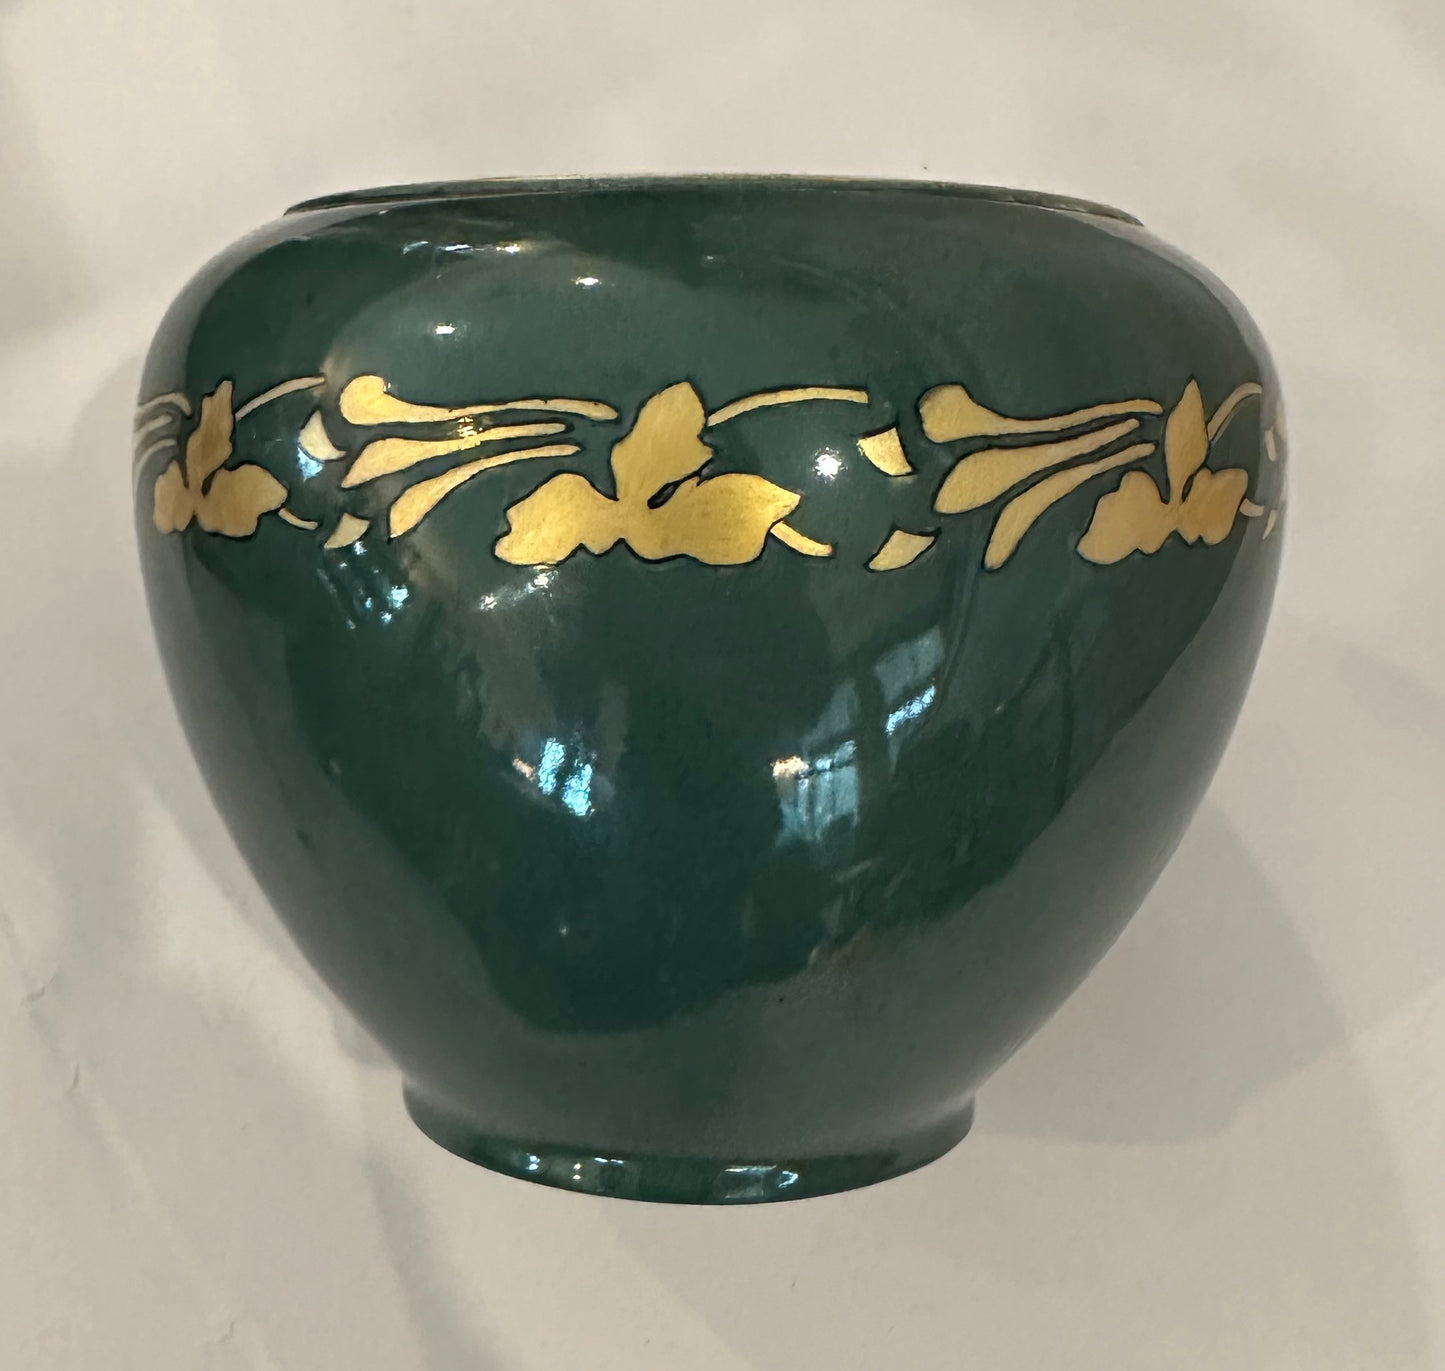 Decor Antique 1918 Emerald Green and Gold Vase/Planter by GDA in Limoges France Signed by Crozat